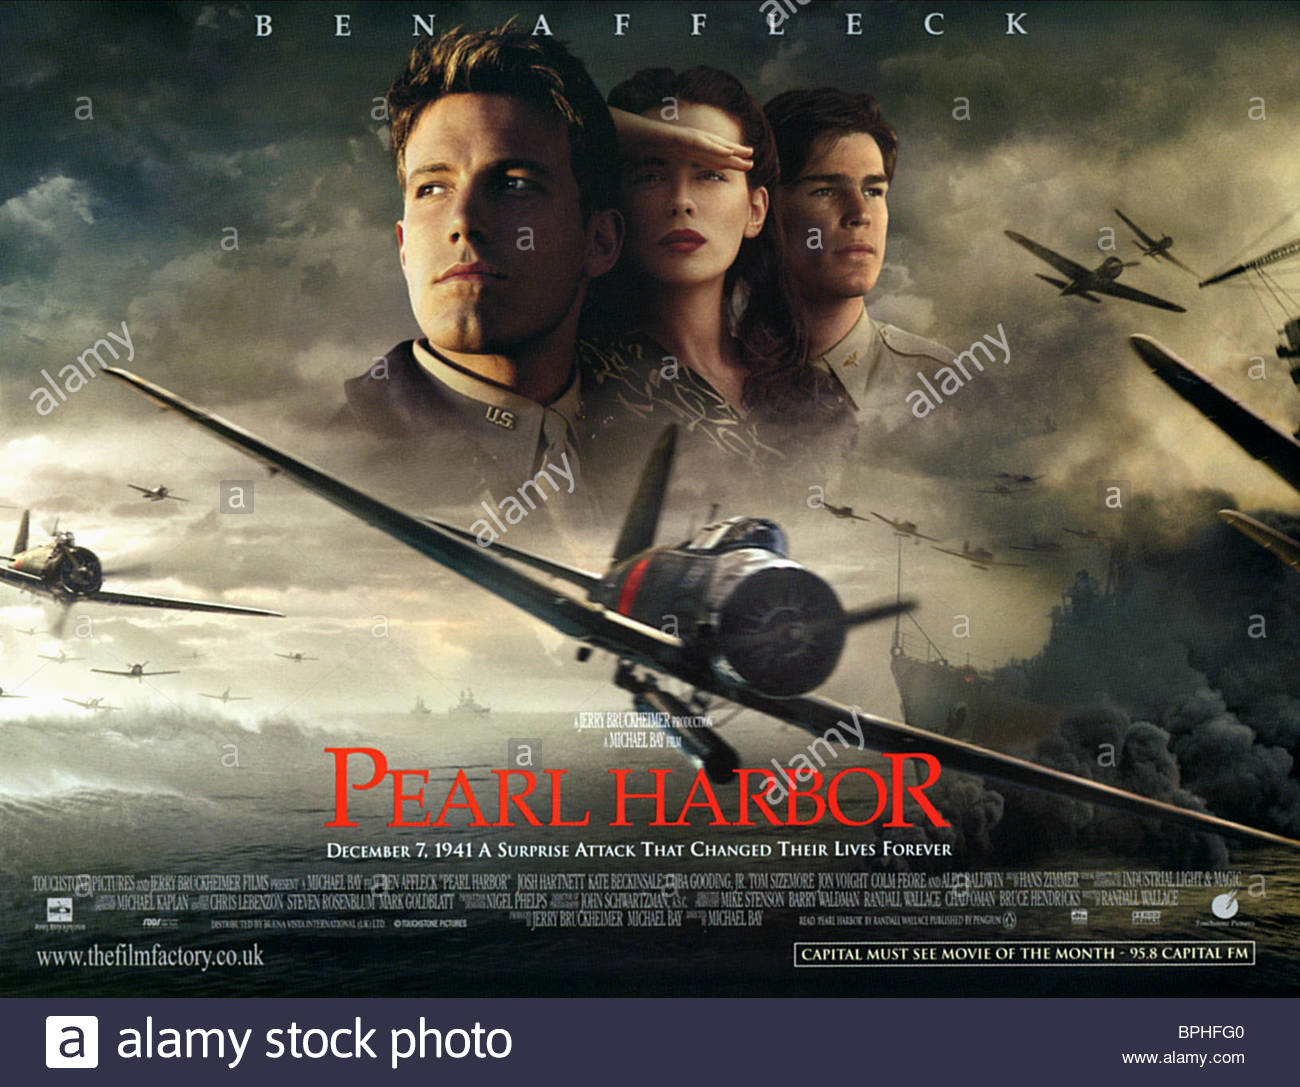 Pearl Harbour Movie In Hindi For Mobile